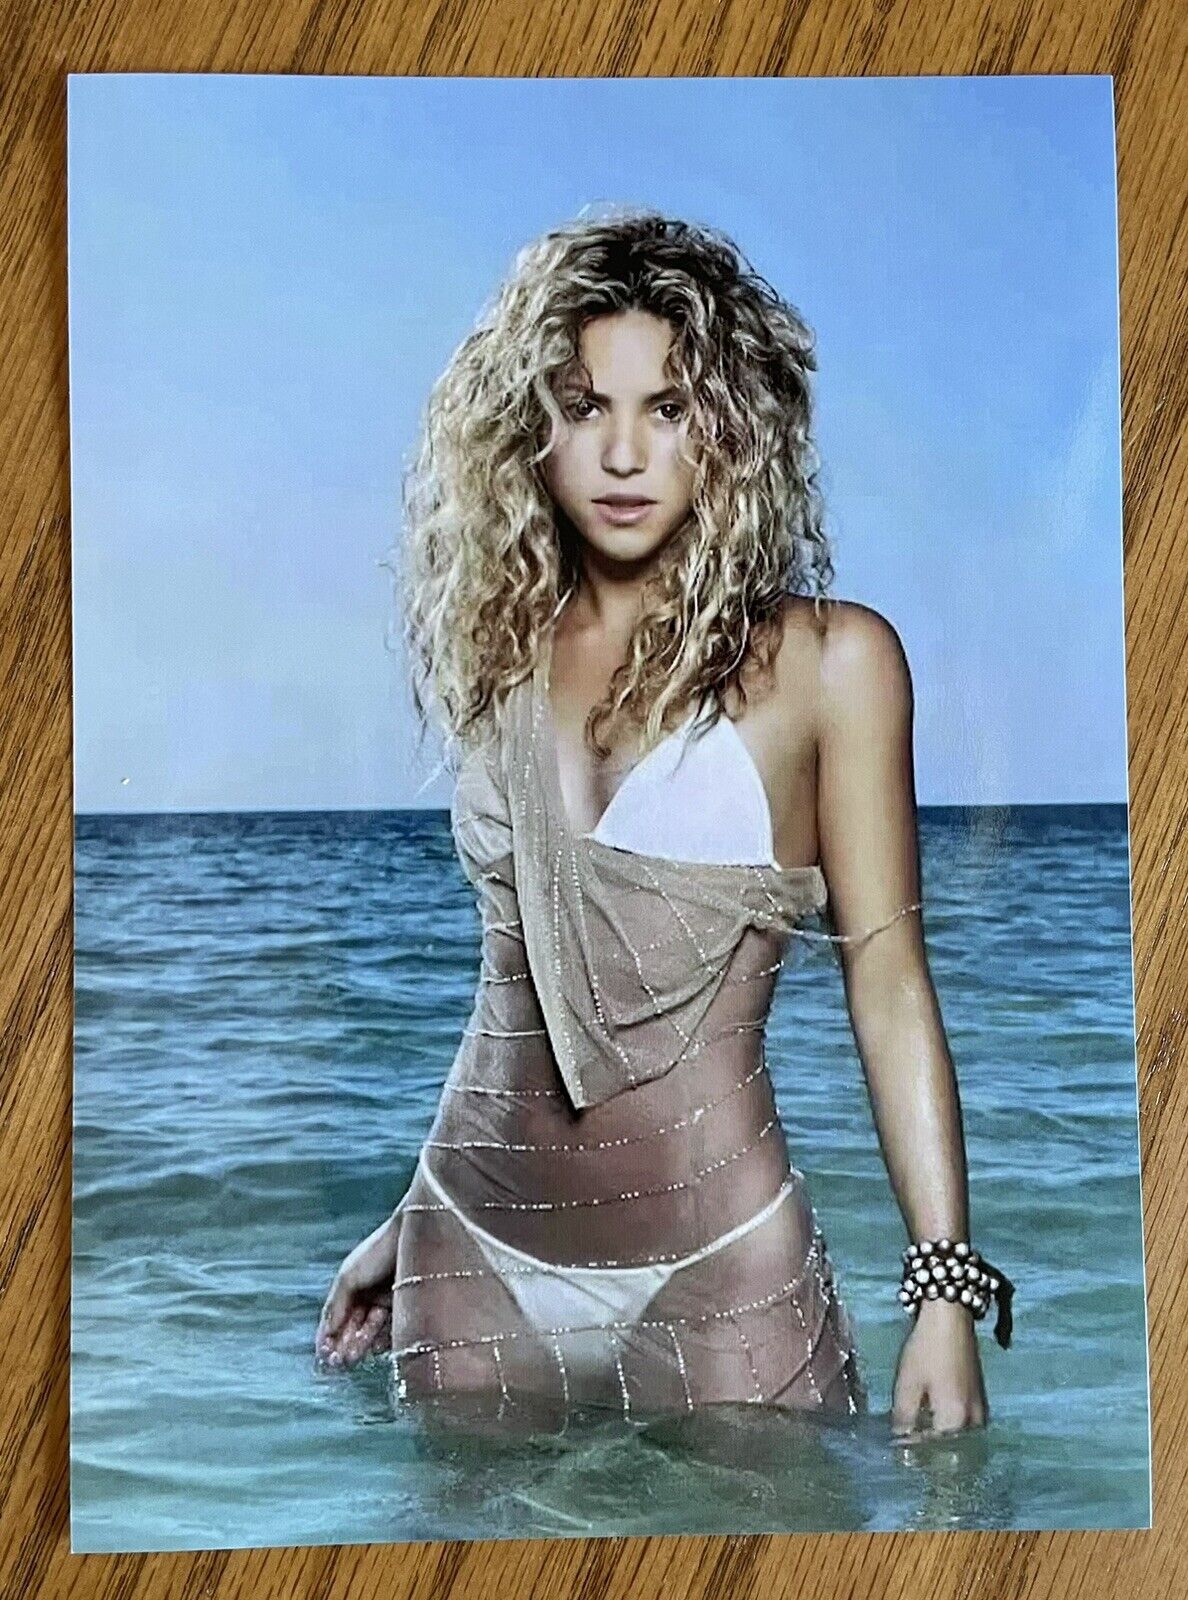 “Shakira” Colombian Singer/Songwriter 5X7 Glossy Color Photo “STUNNING”💋